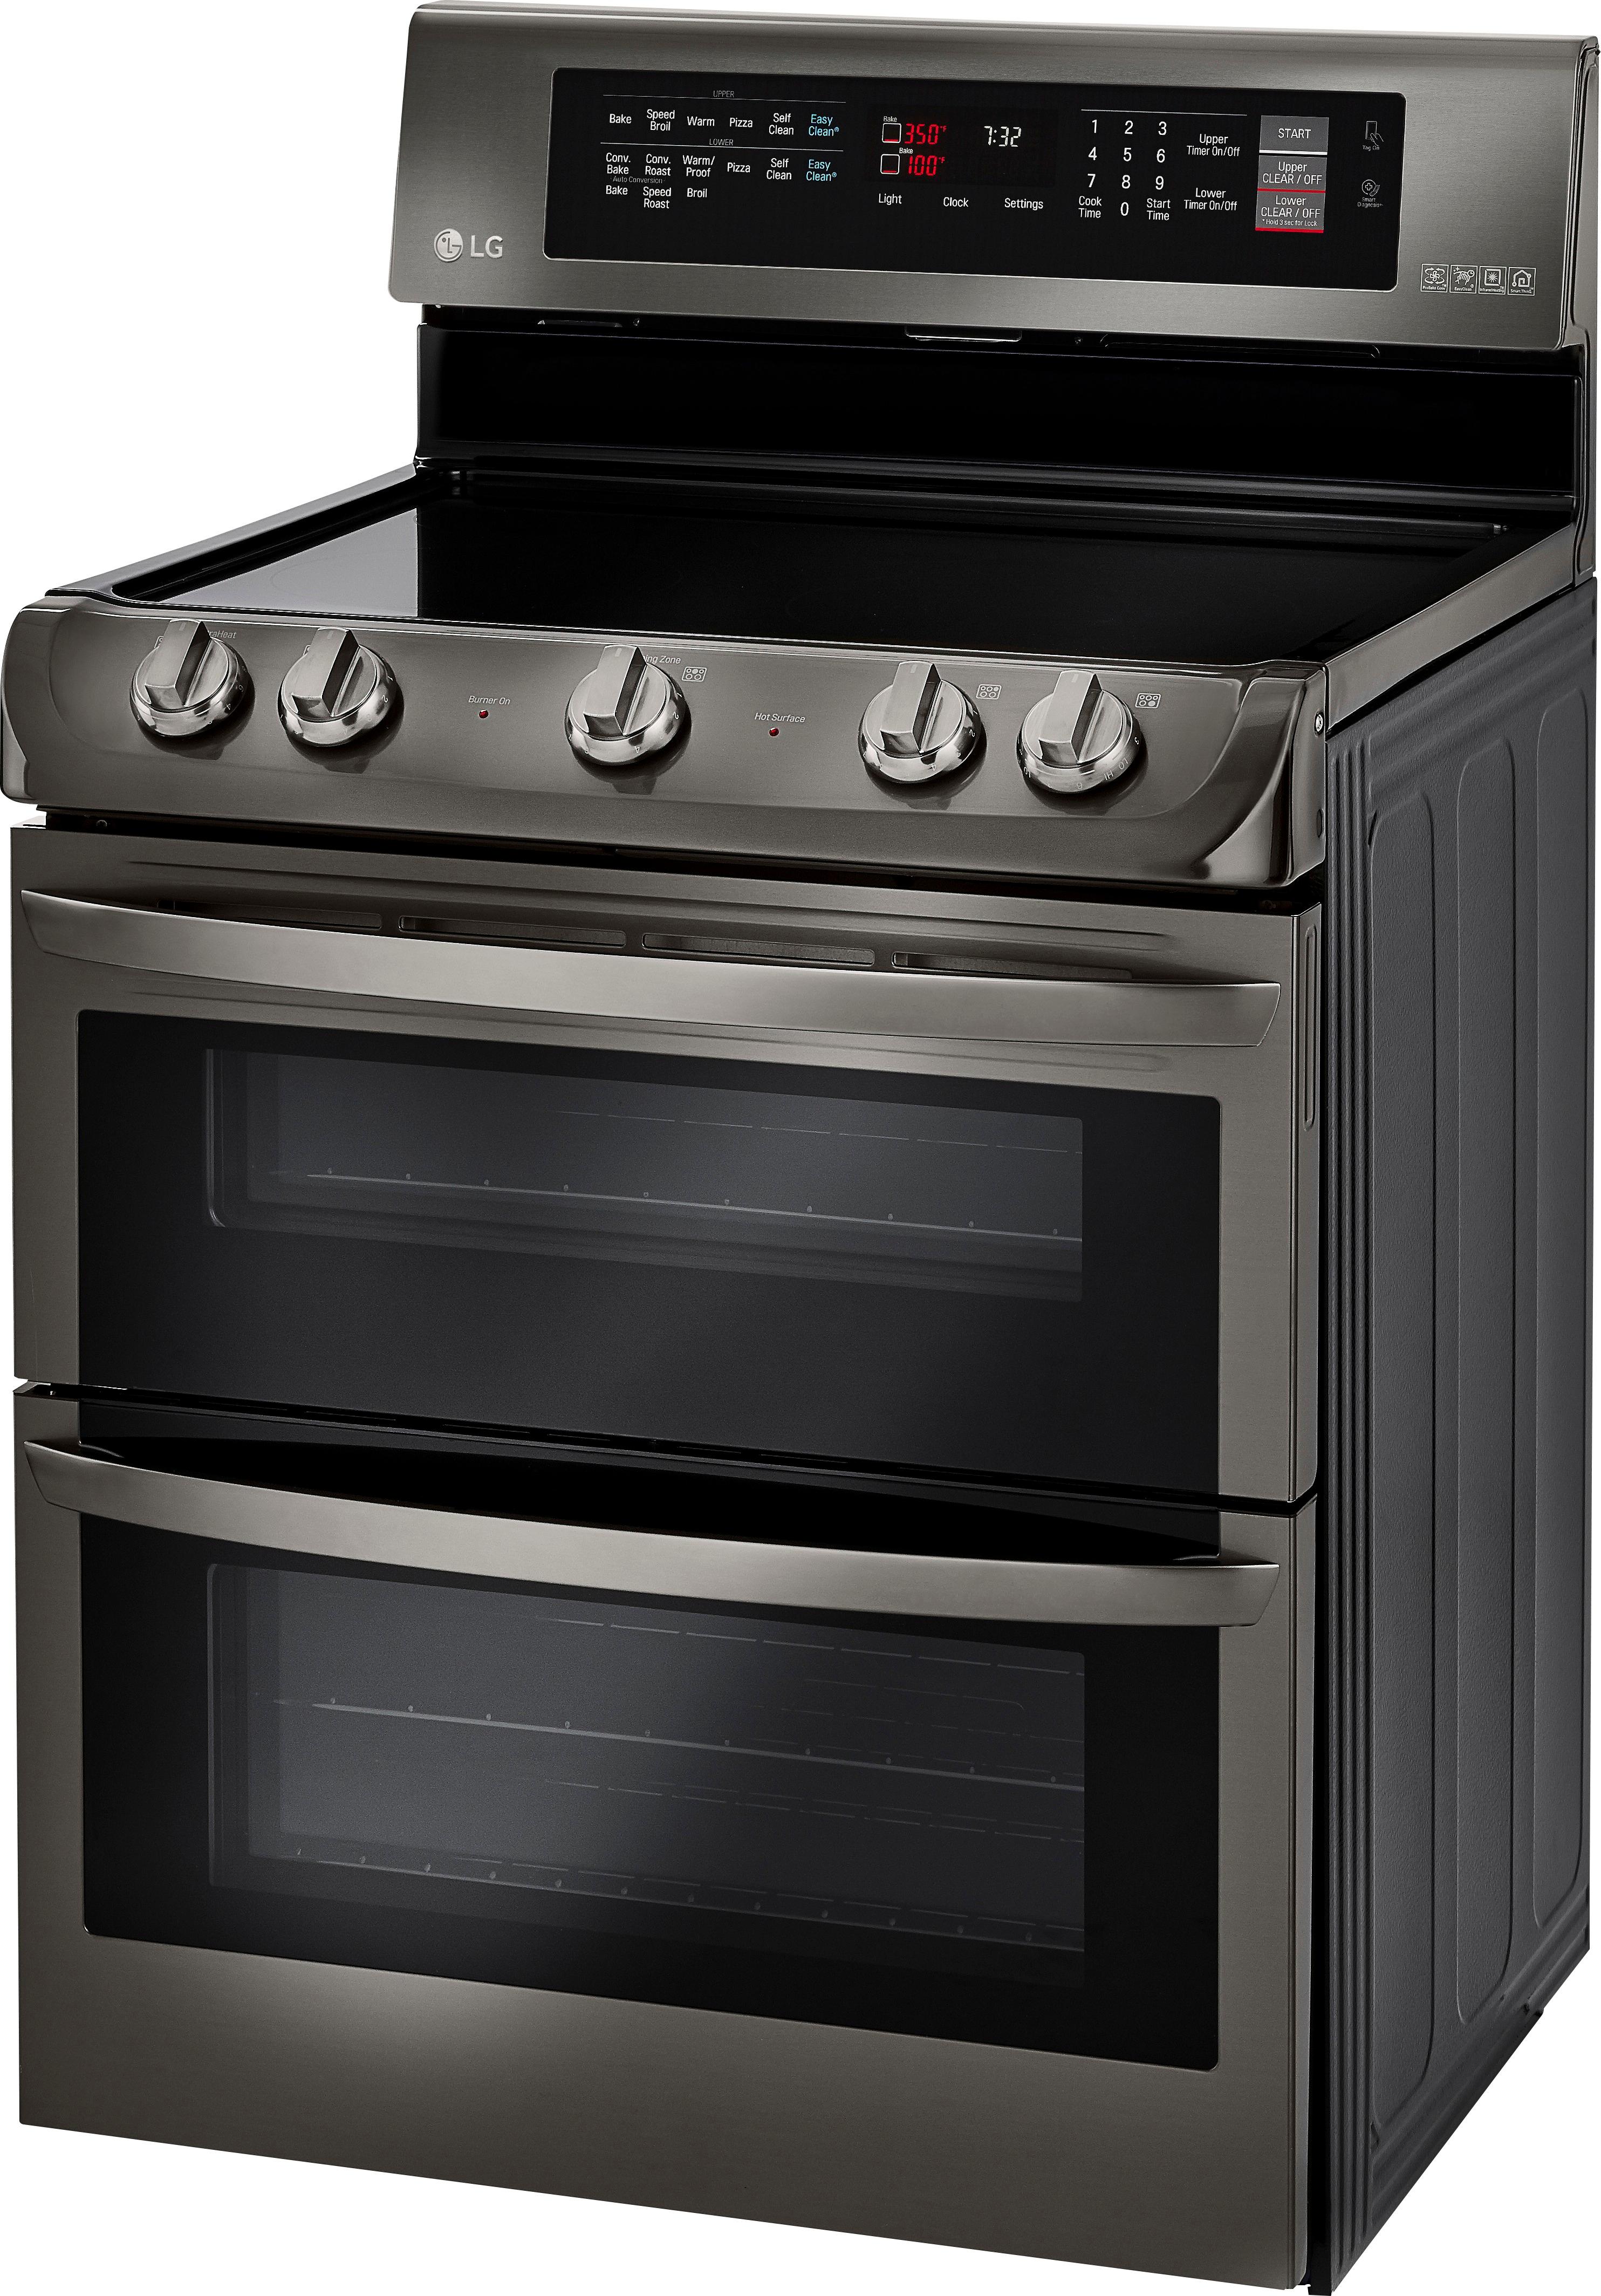 LG 7.3 Cu. Ft. Self-Cleaning Freestanding Double Oven Electric Range Lg Electric Range Stainless Steel